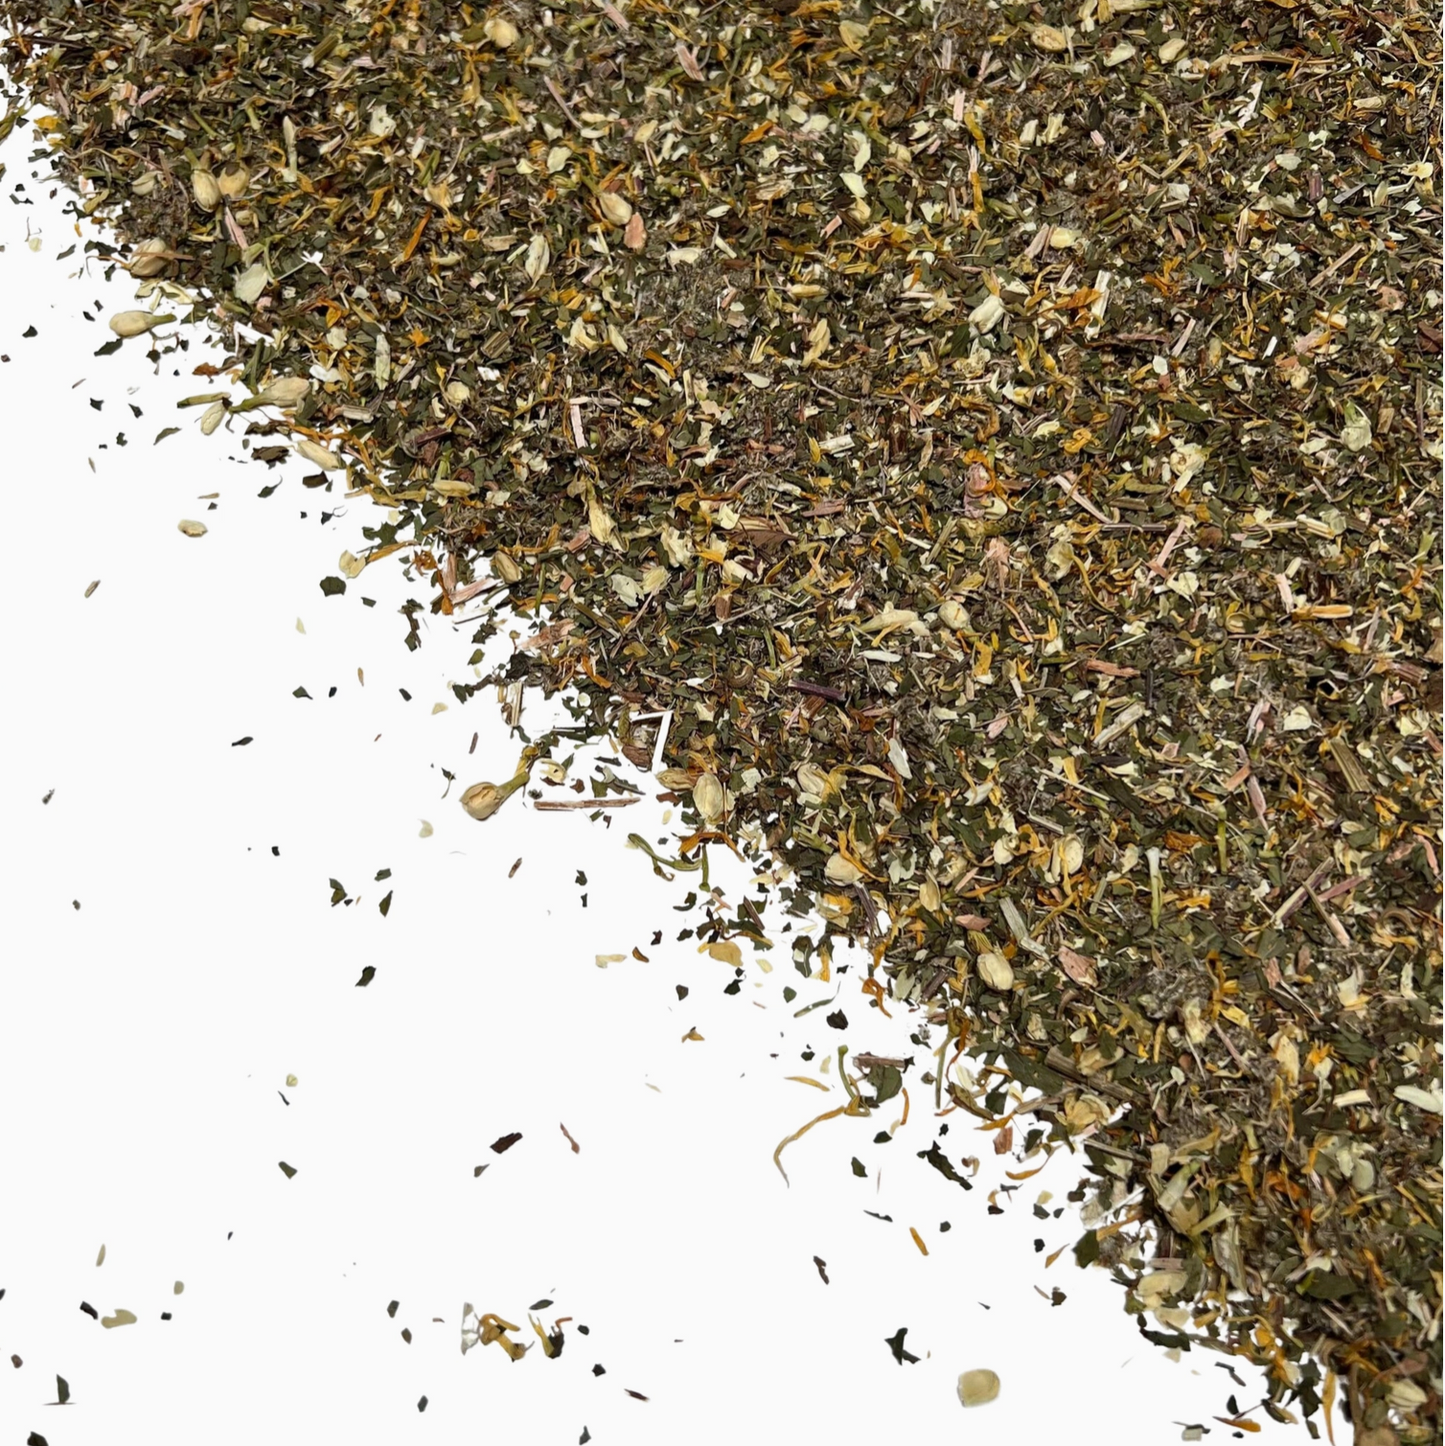 Herbal Additions for DIY Bath Salts Only - OZ